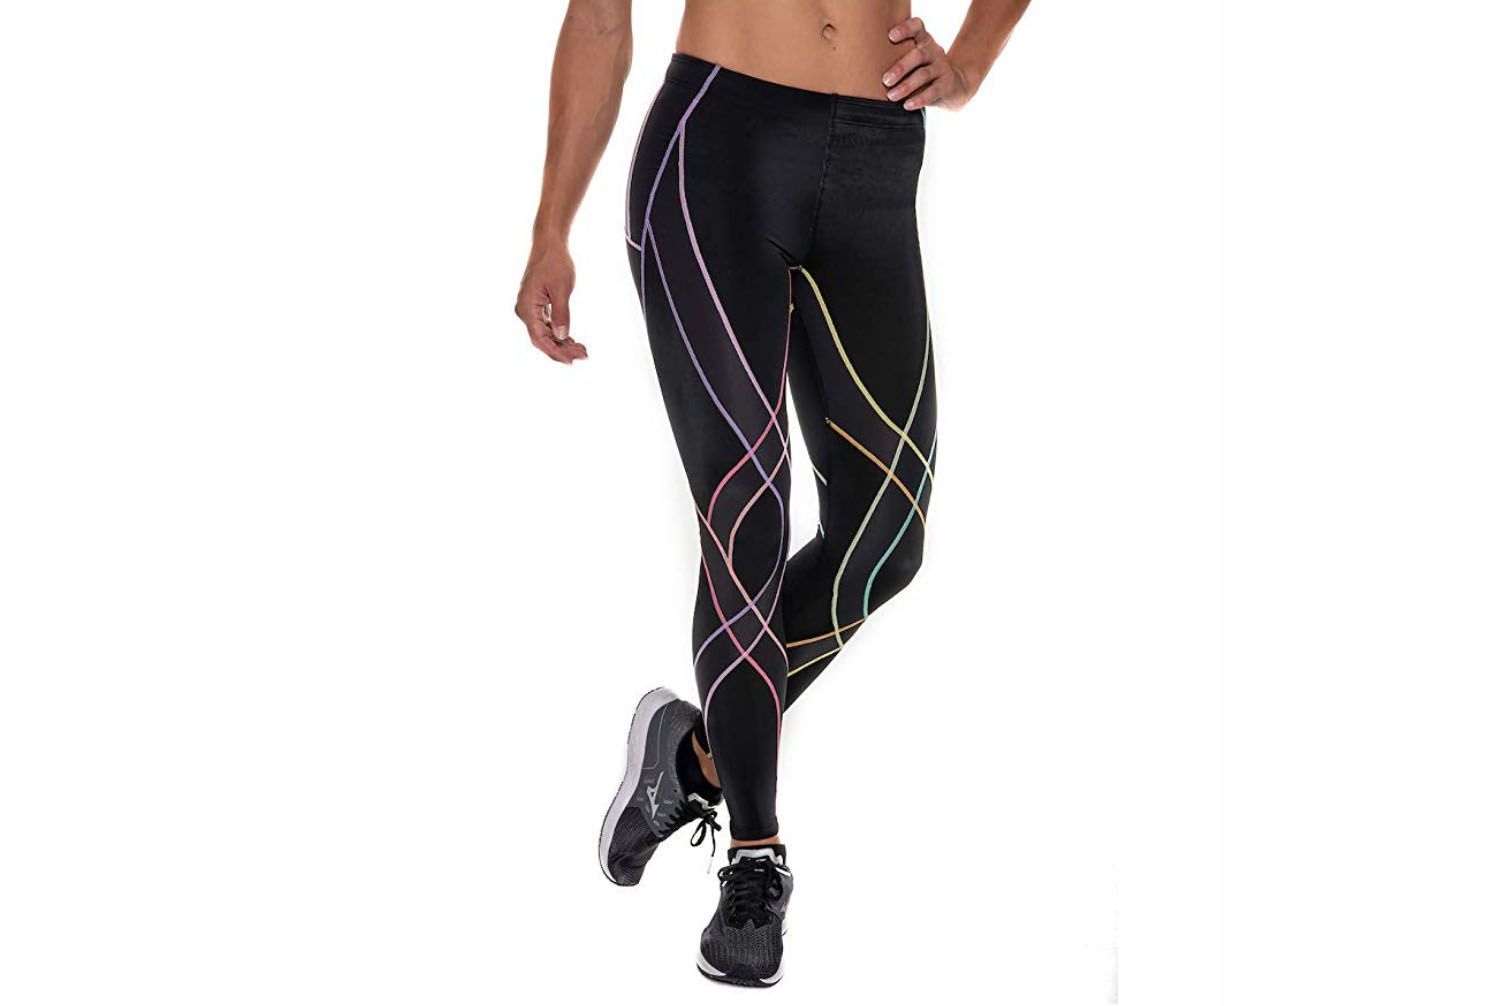 Best Compression Leggings For Circulation  International Society of  Precision Agriculture